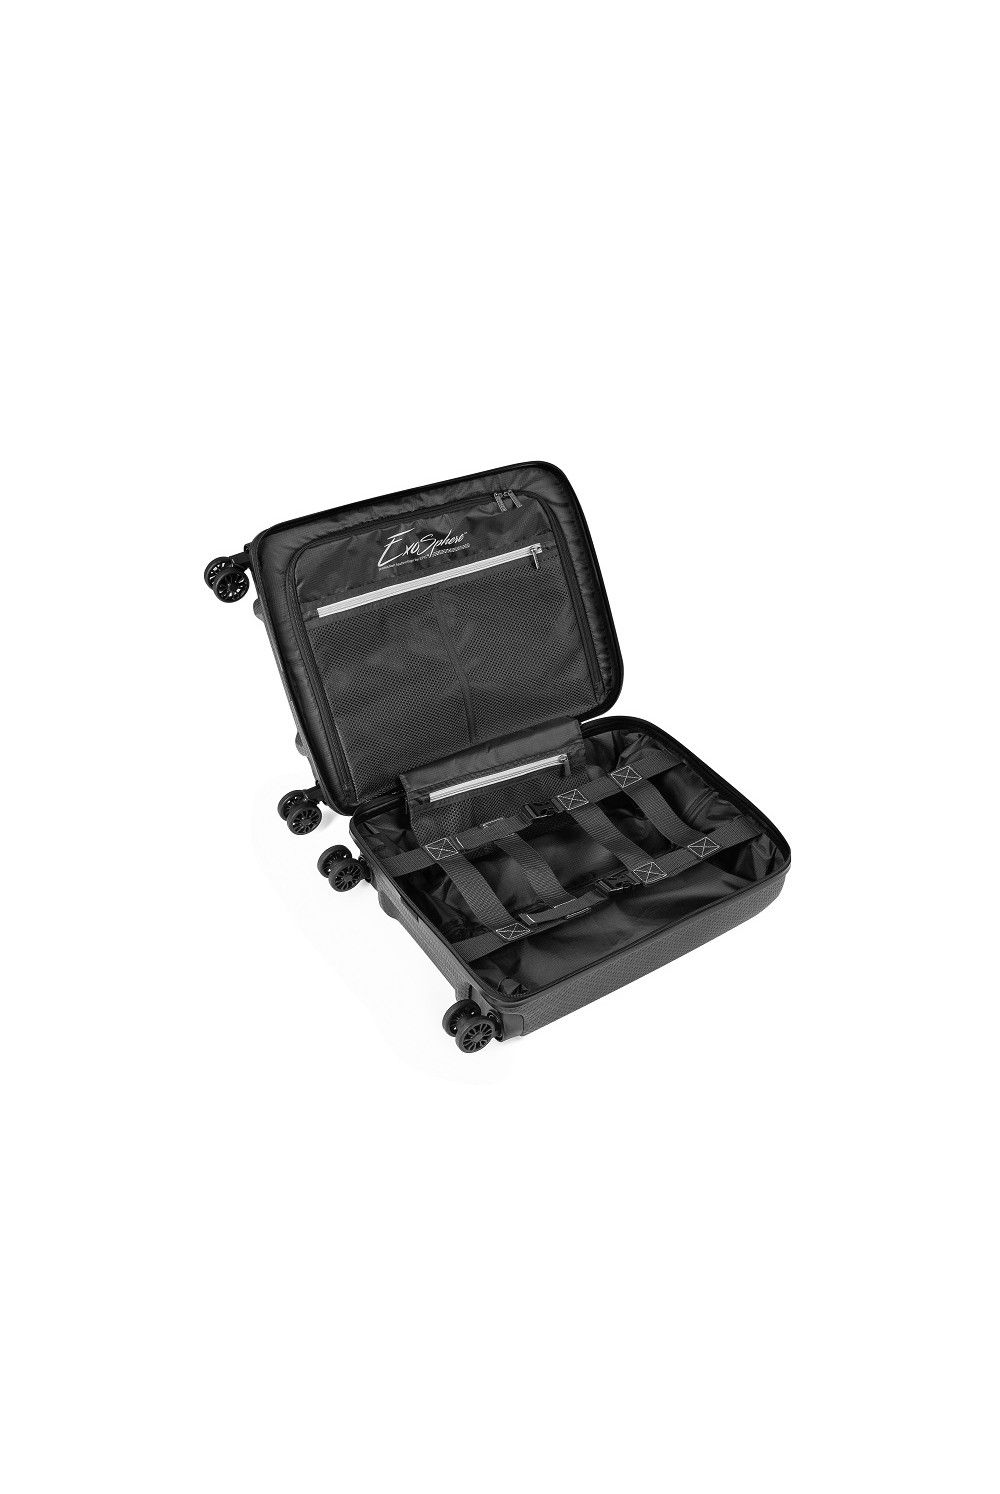 Hand luggage suitcase Epic GTO 5 55cm outer compartment